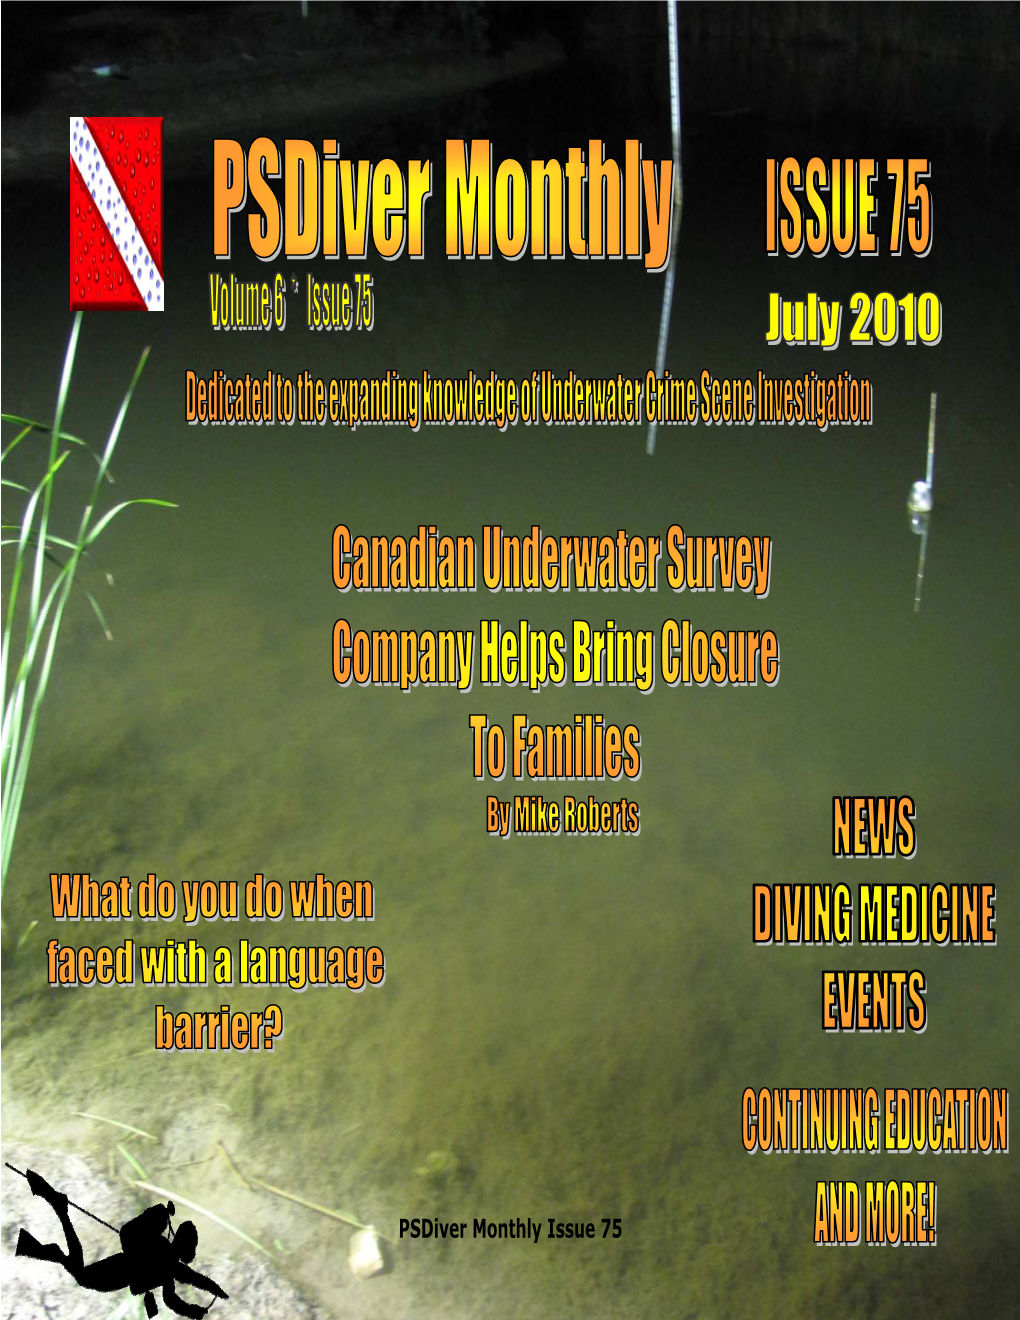 Psdiver Monthly Issue 75